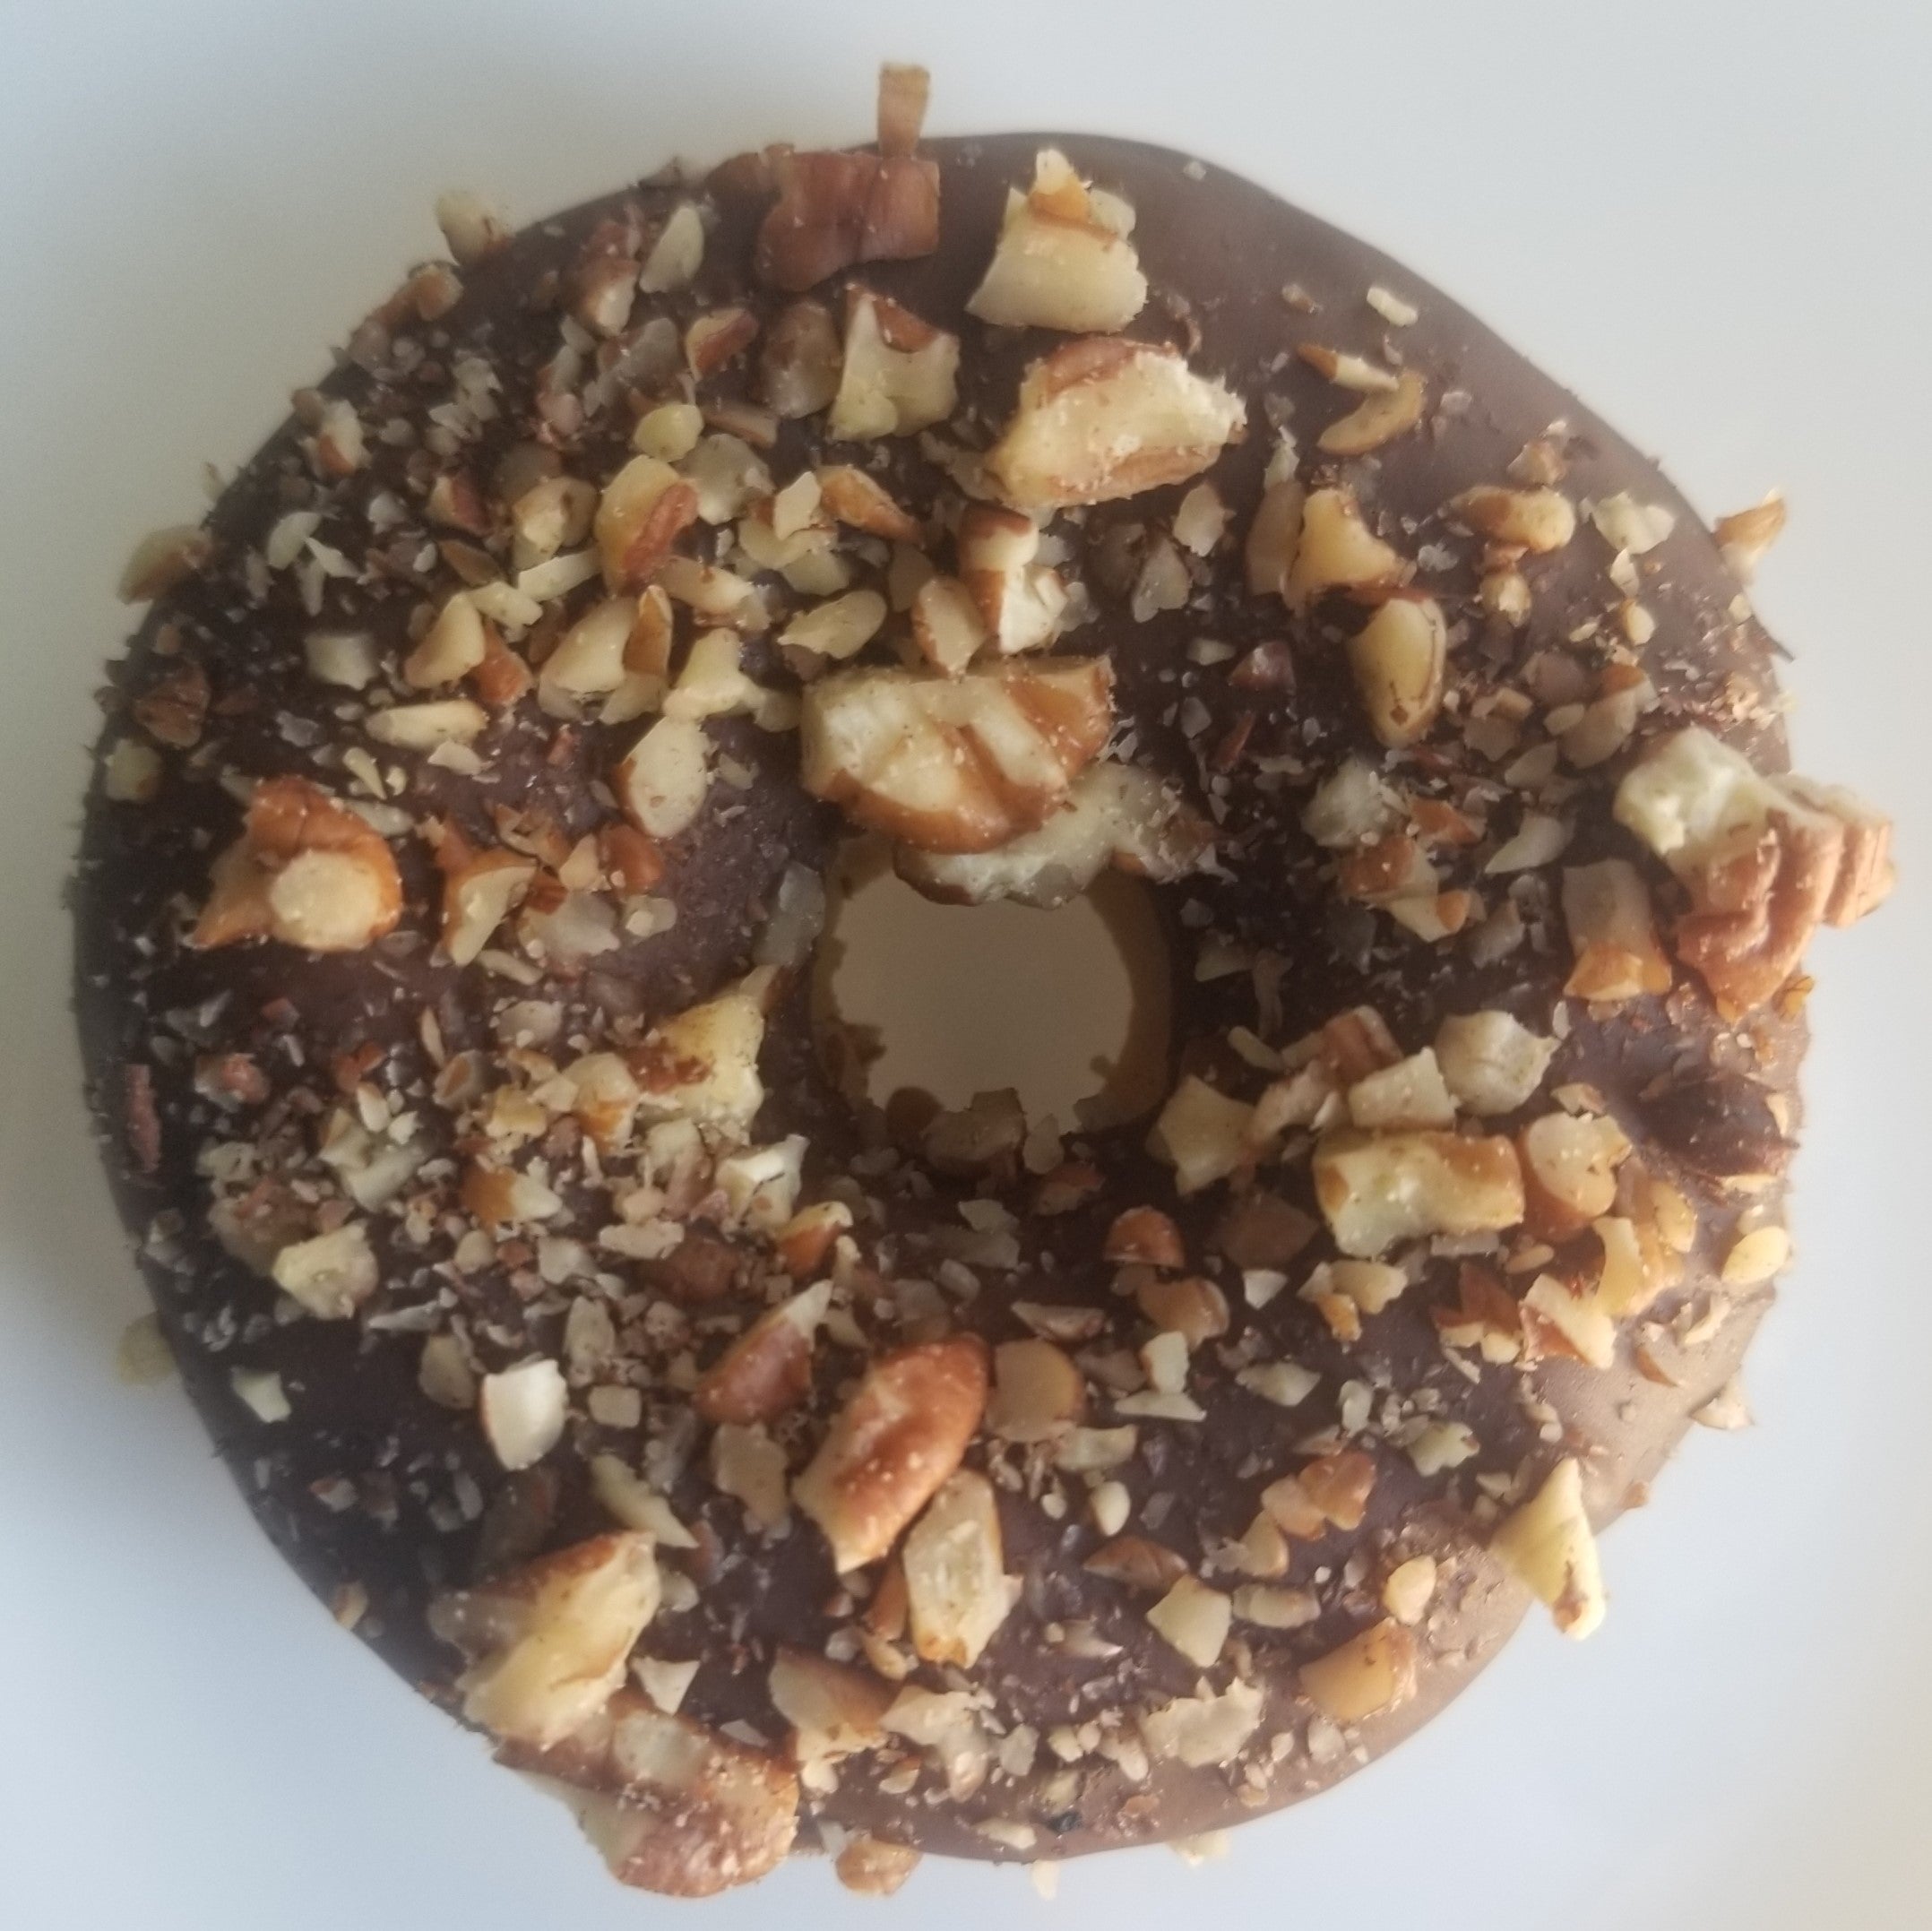 Lo-Ca Plain Donut with Chopped Pecans (Calories 378 Net Carbs 2)